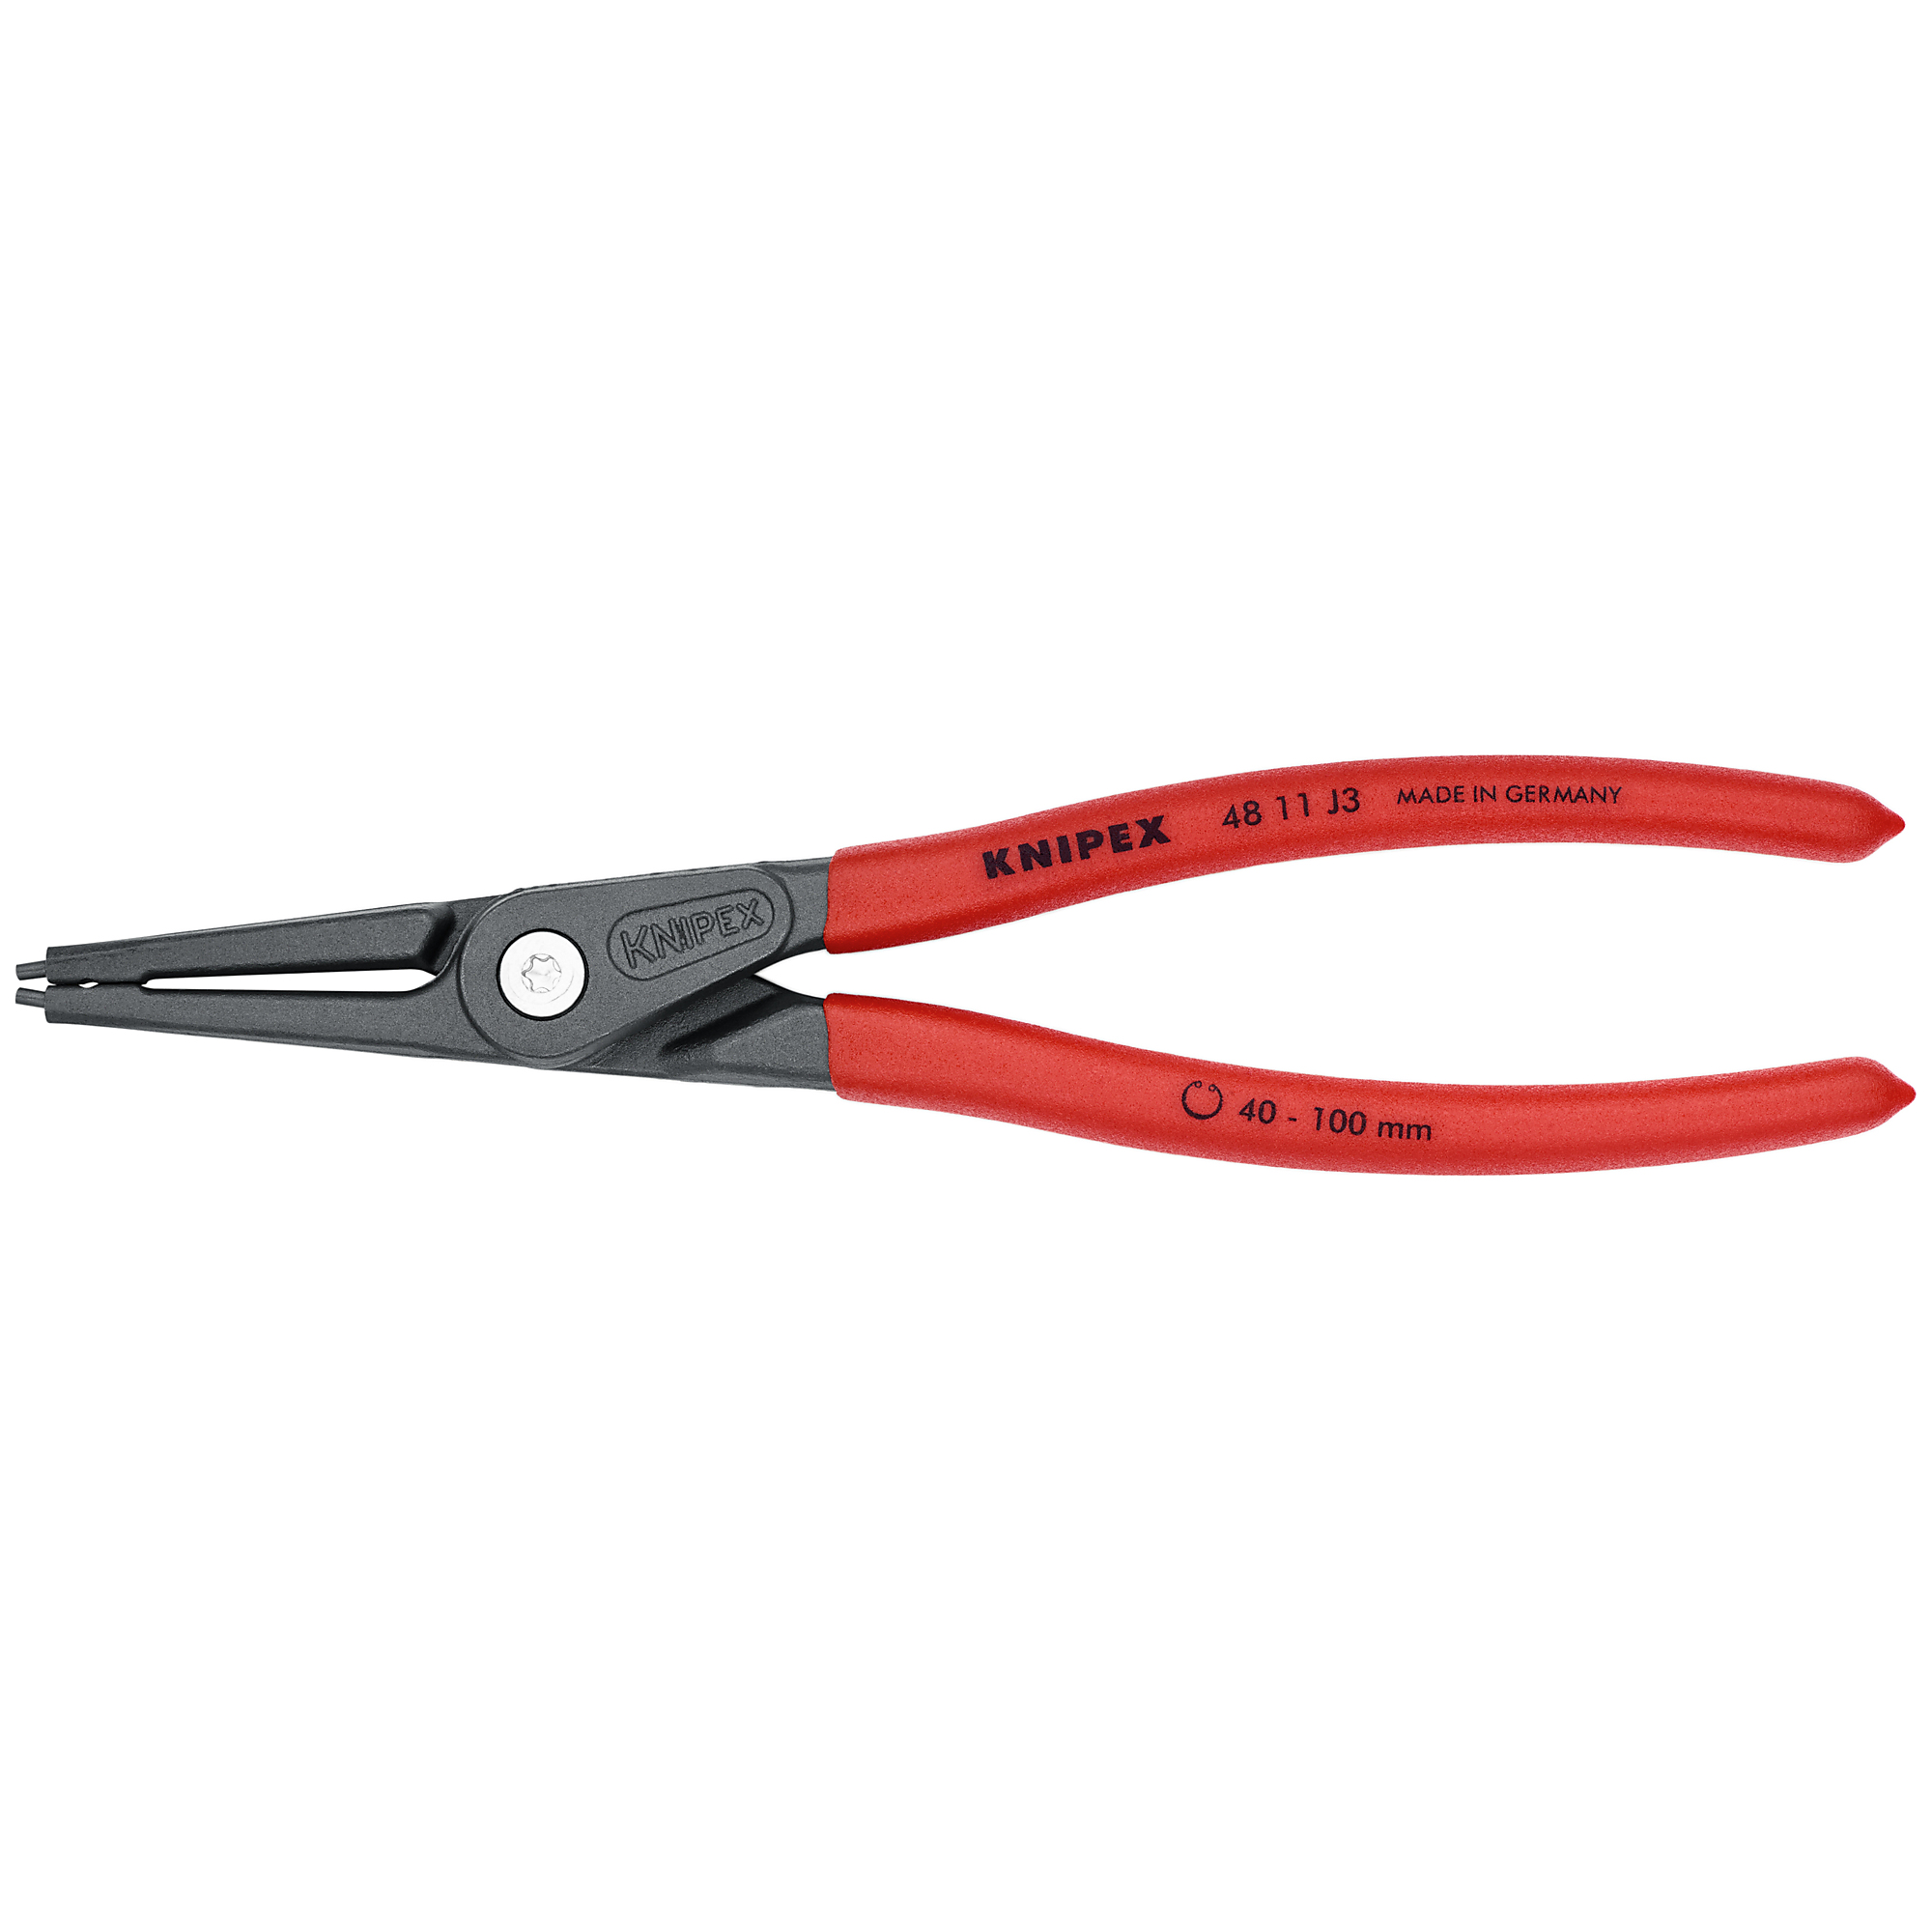 KNIPEX, Int Precision Snap Ring Pliers, 3/32 tip, 9Inch, Pieces (qty.) 1 Material Steel, Model 48 11 J3